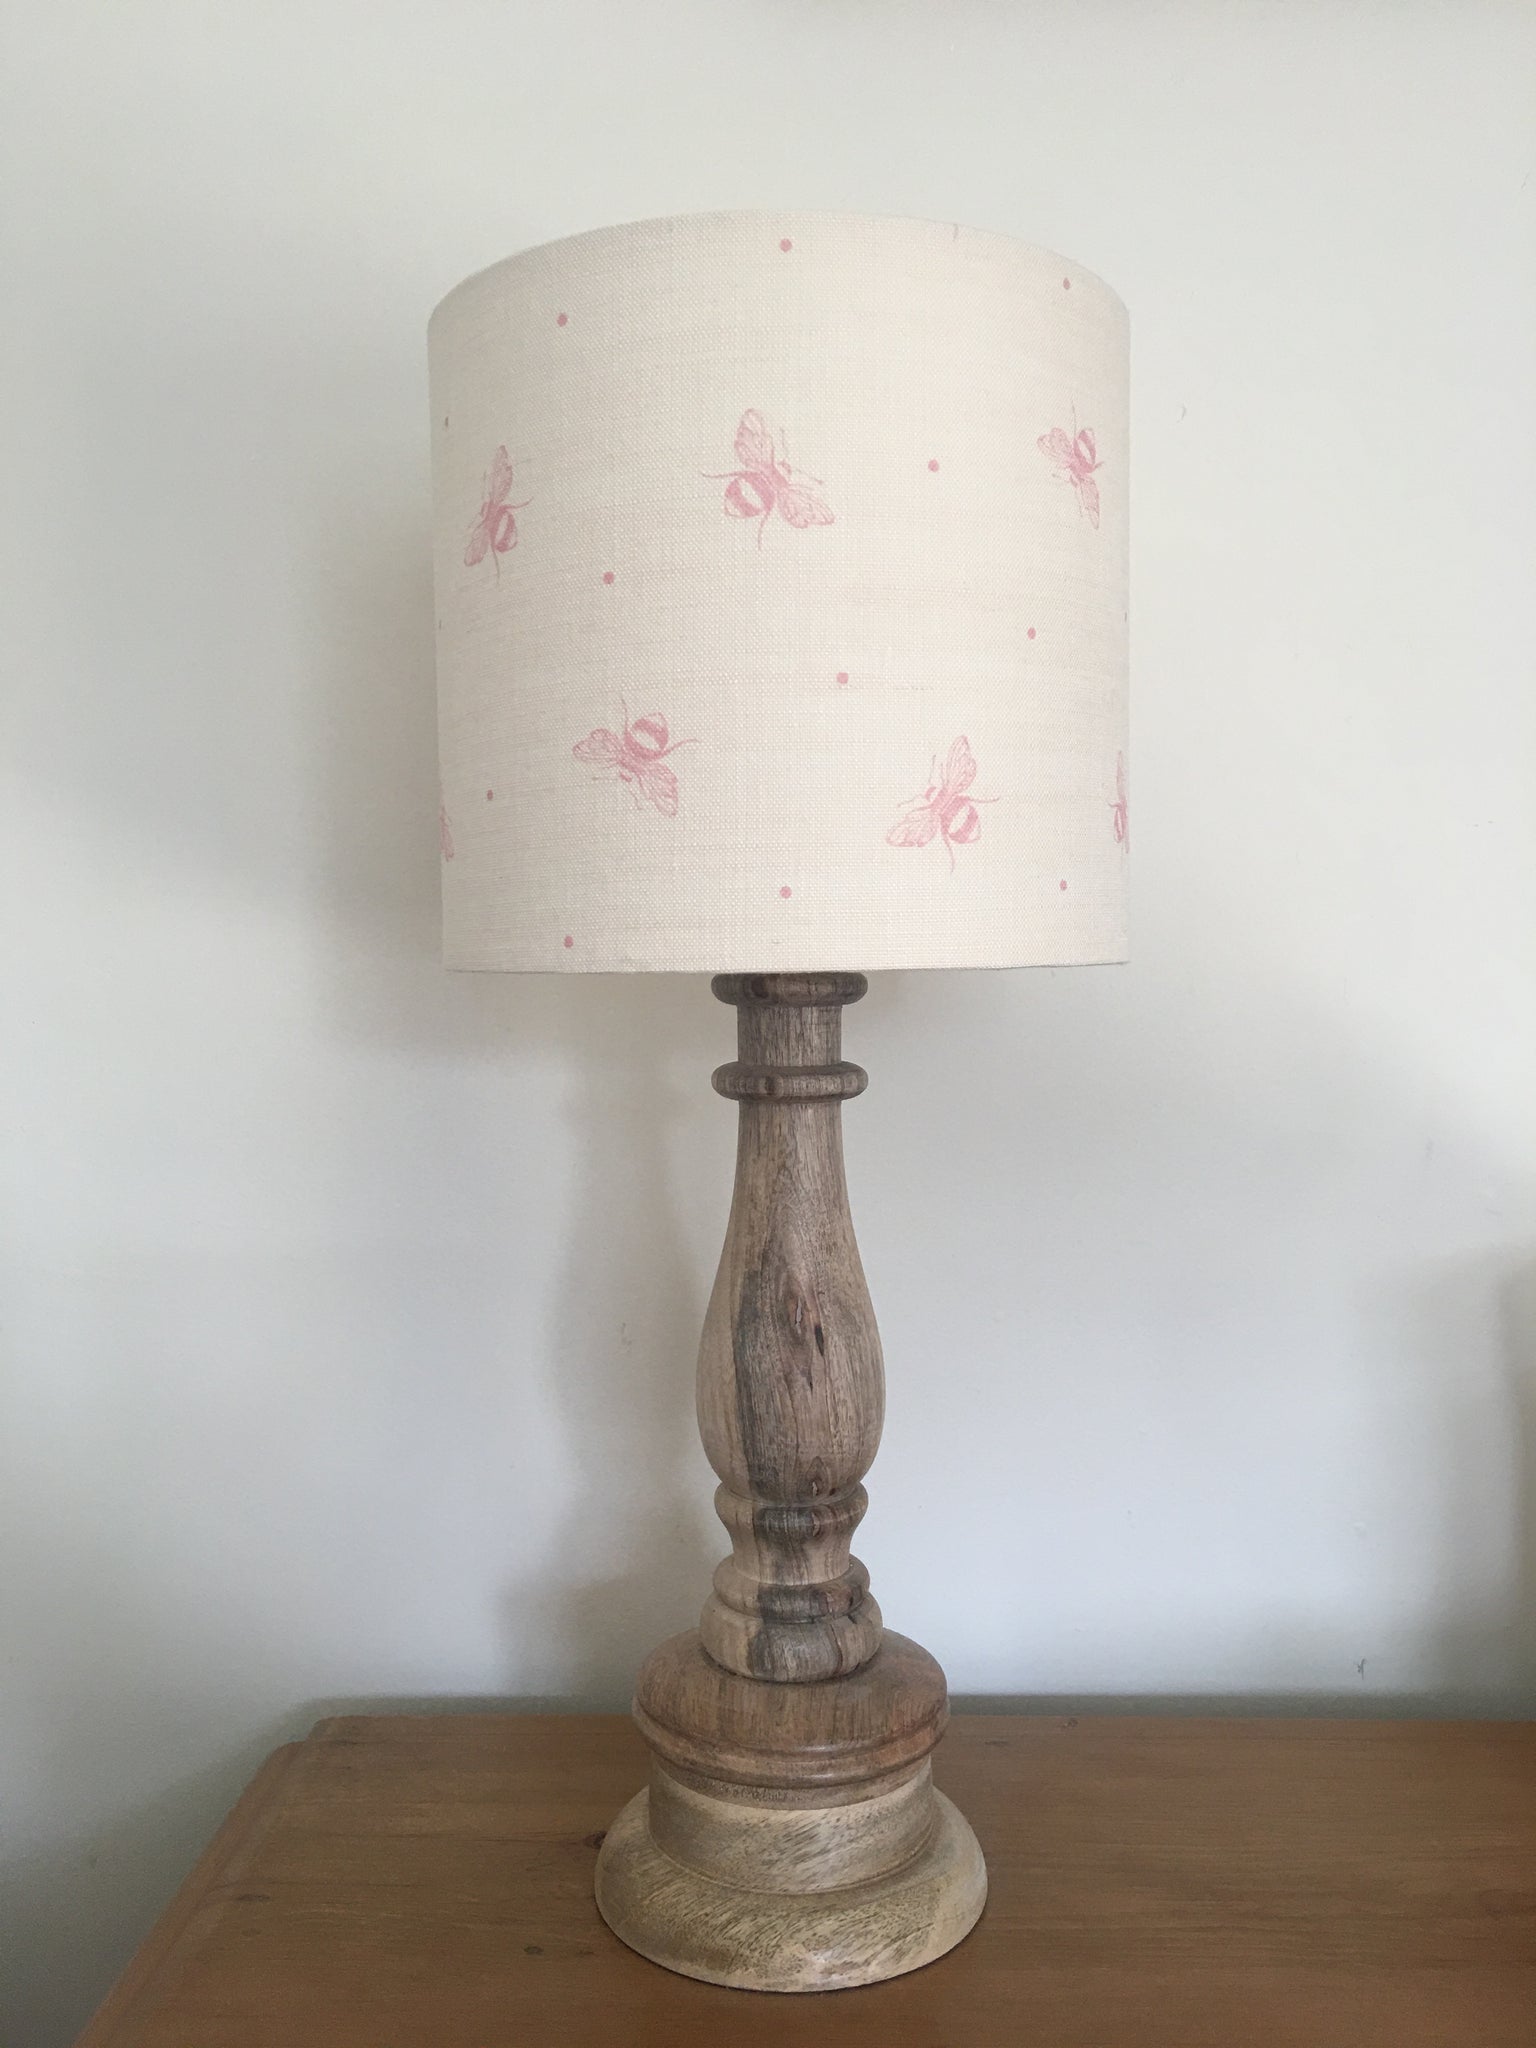 Drum Lampshade in Peony & Sage Busy Bees, Blush Pink on Ivory Linen.